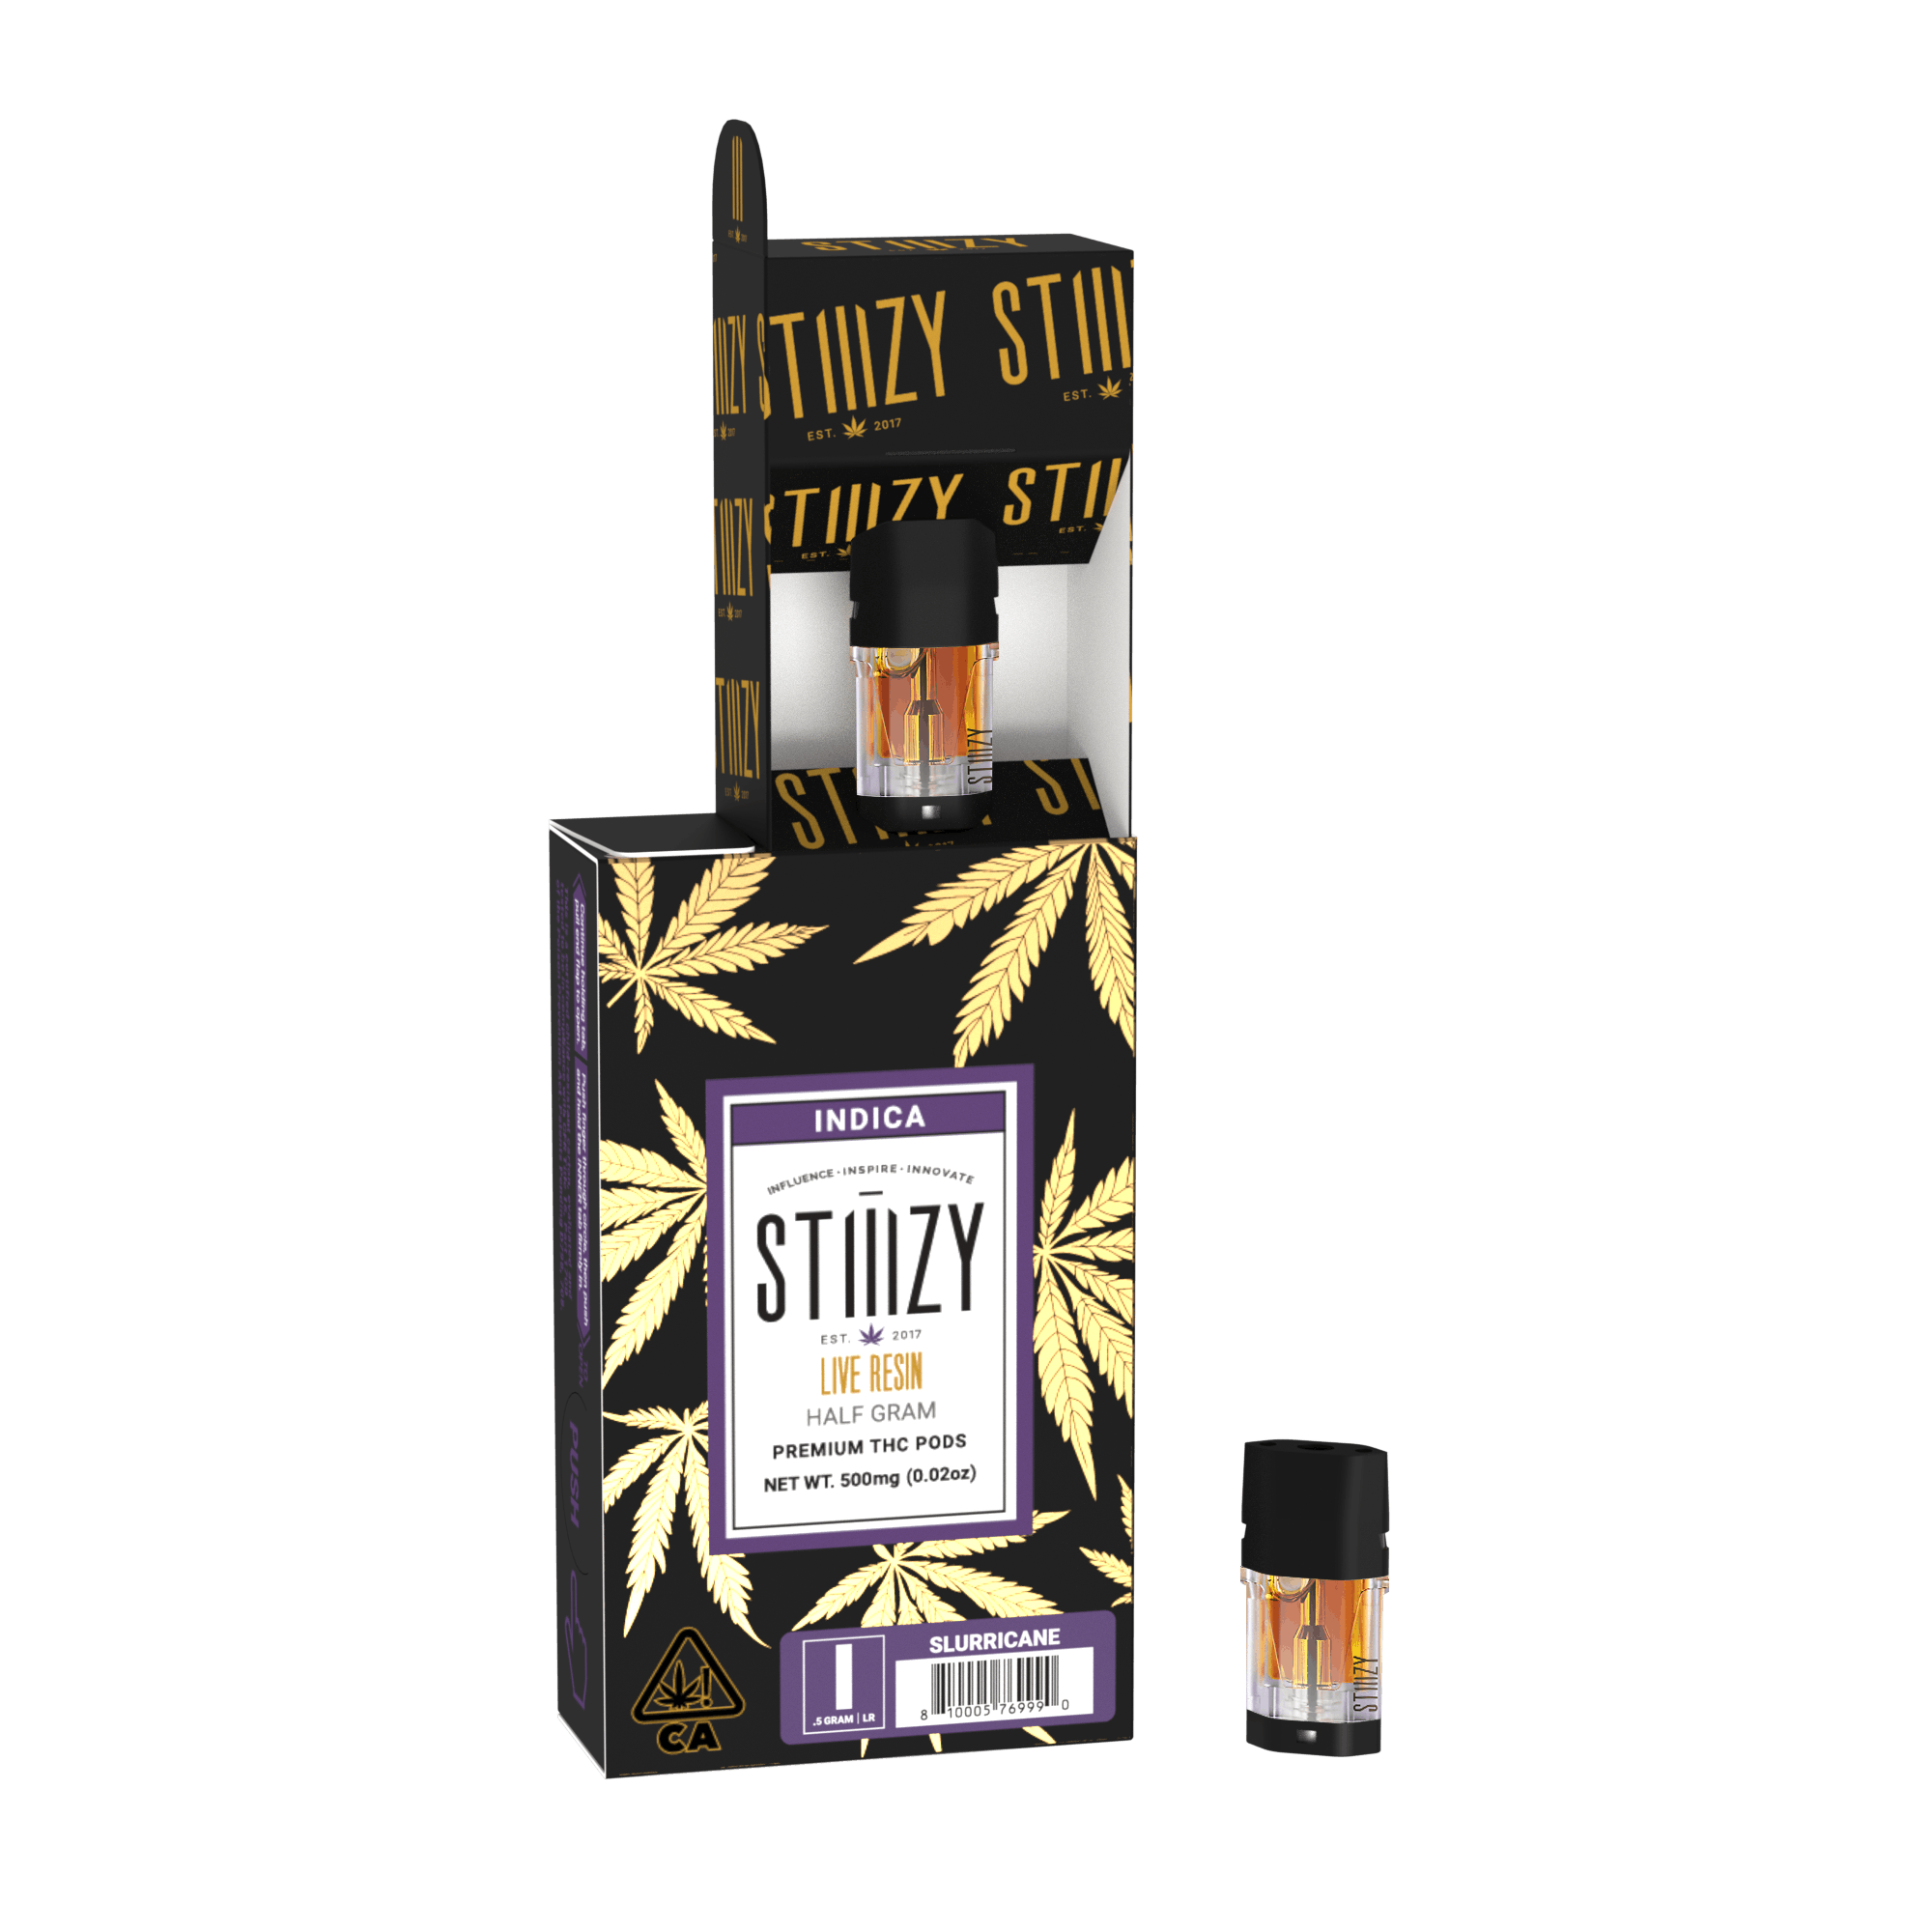 Weed vape pods with live resin extracted the Slurricane strain’s cannabis flower are showcased with their black, gold, and purple box.